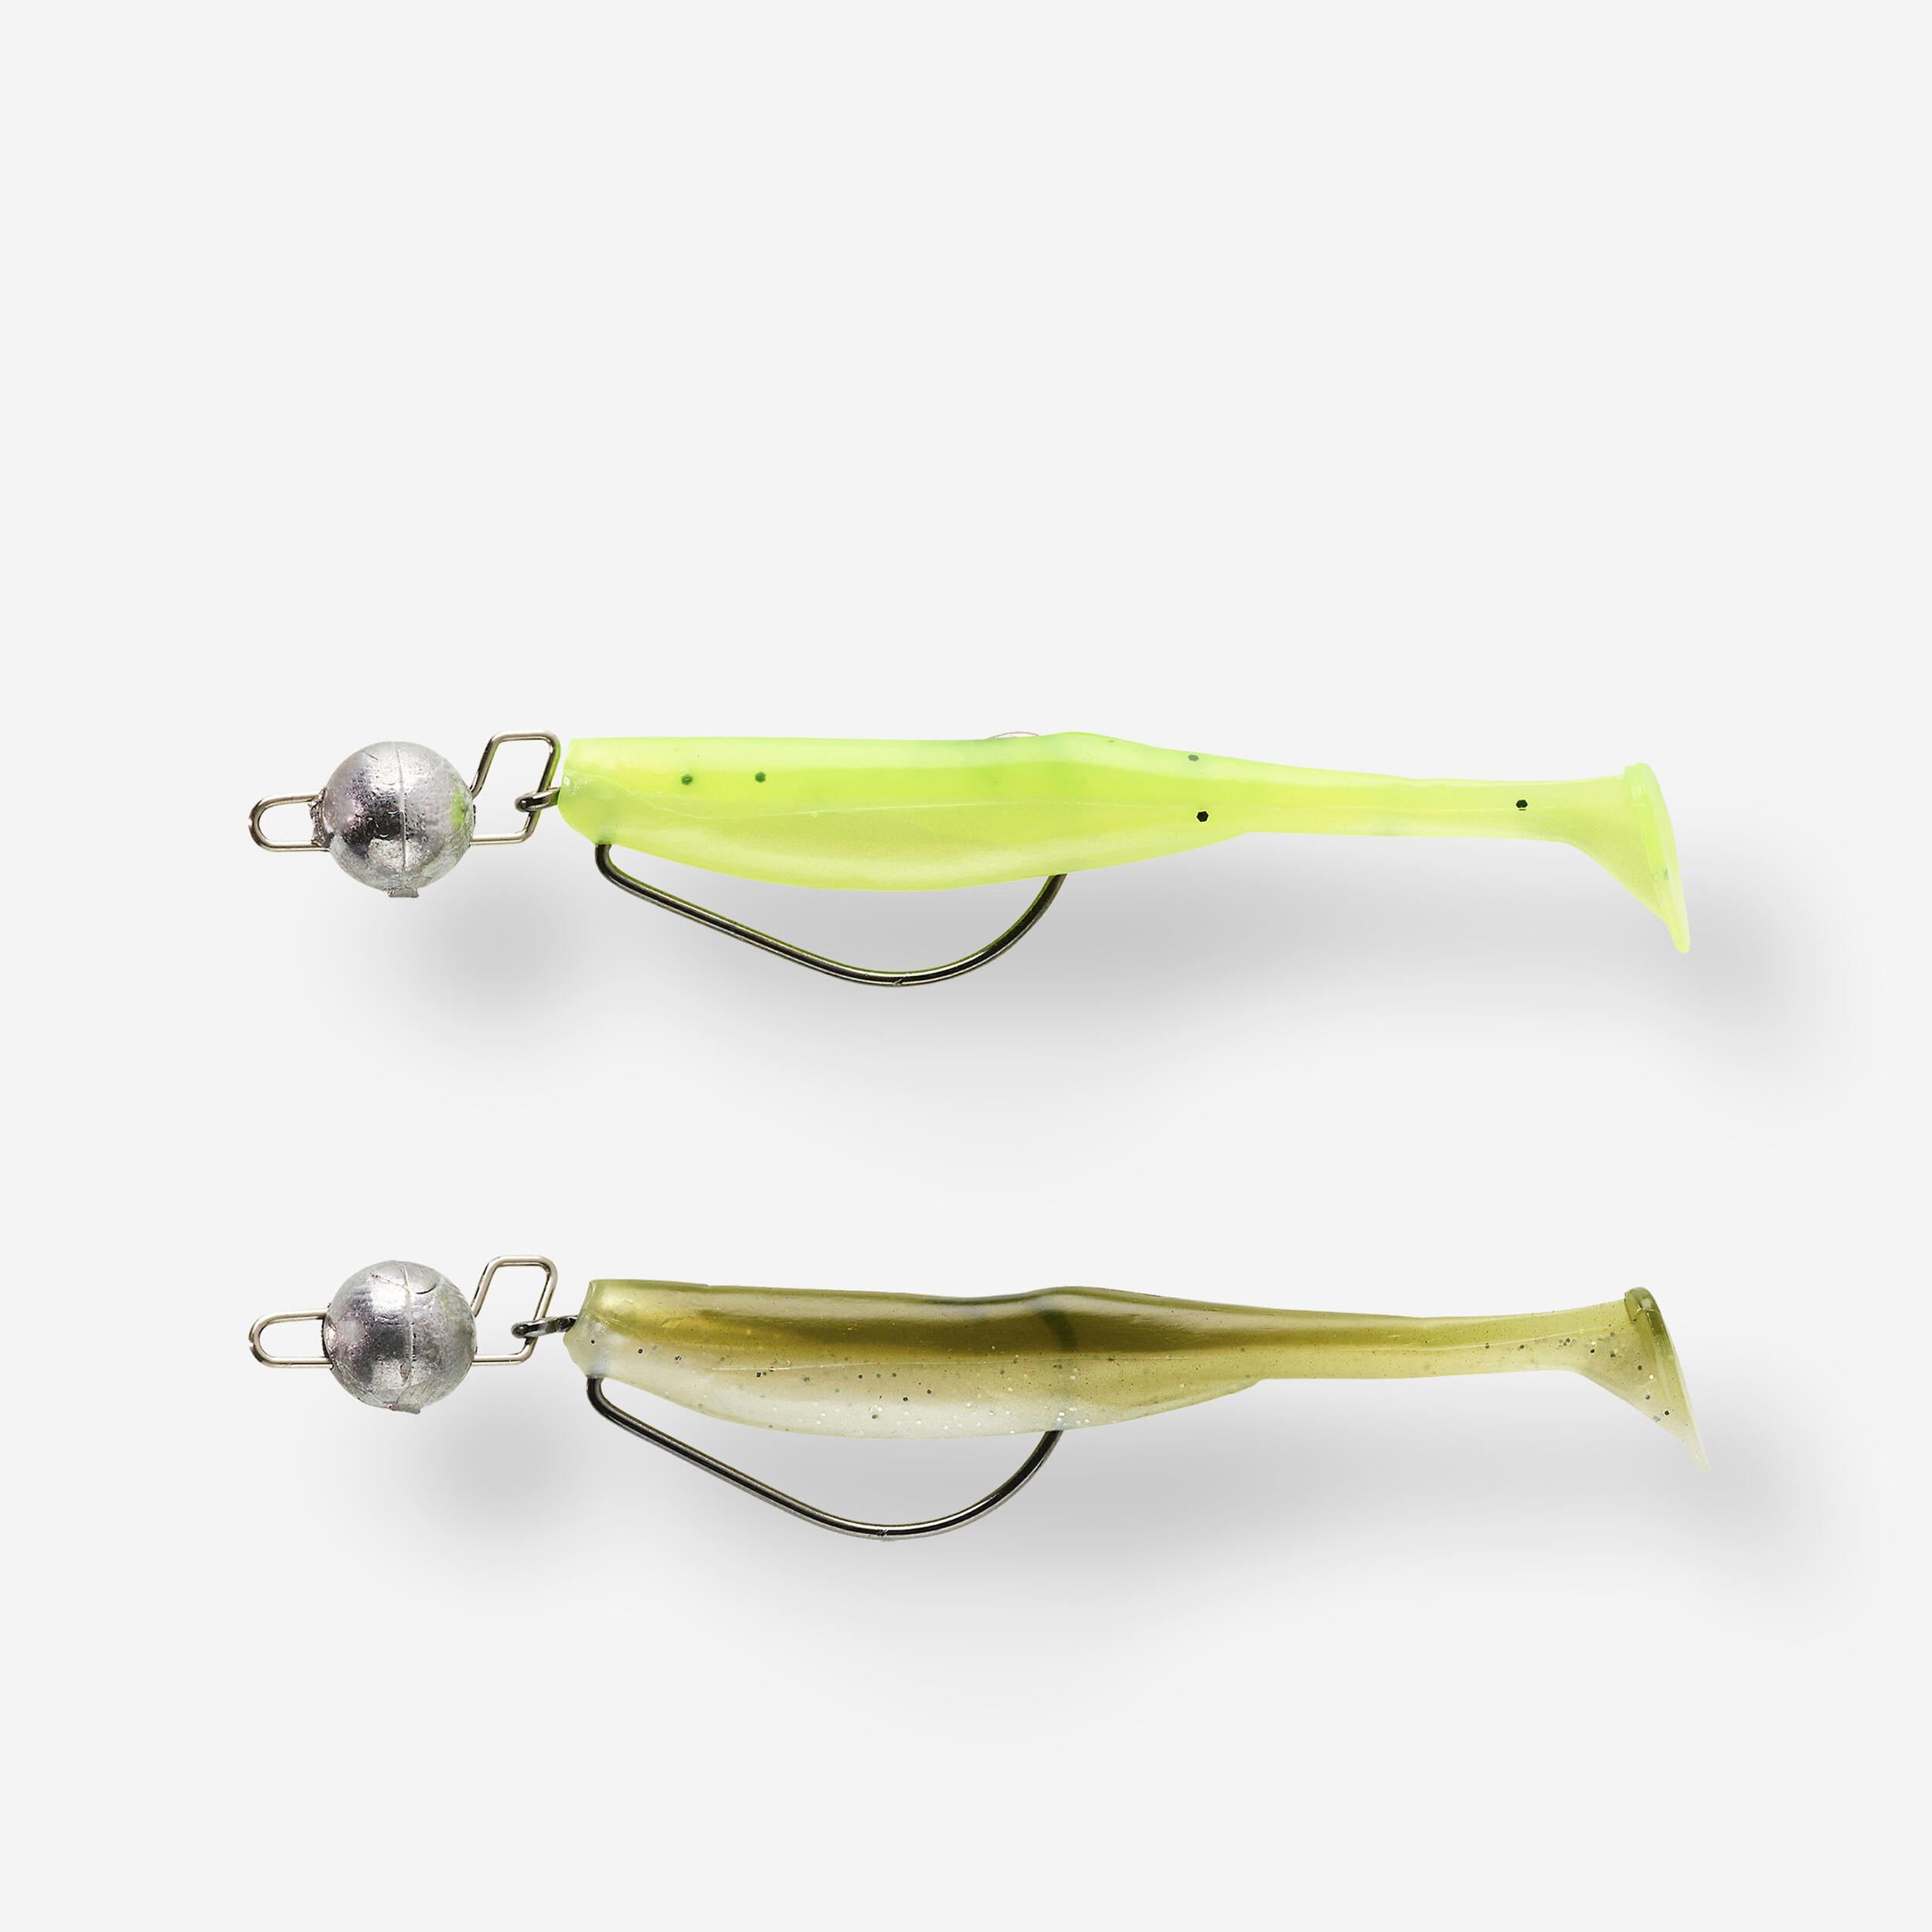 ENHANCE THE ATTRACTIVENESS of Your Lures with 18pcs Reflective